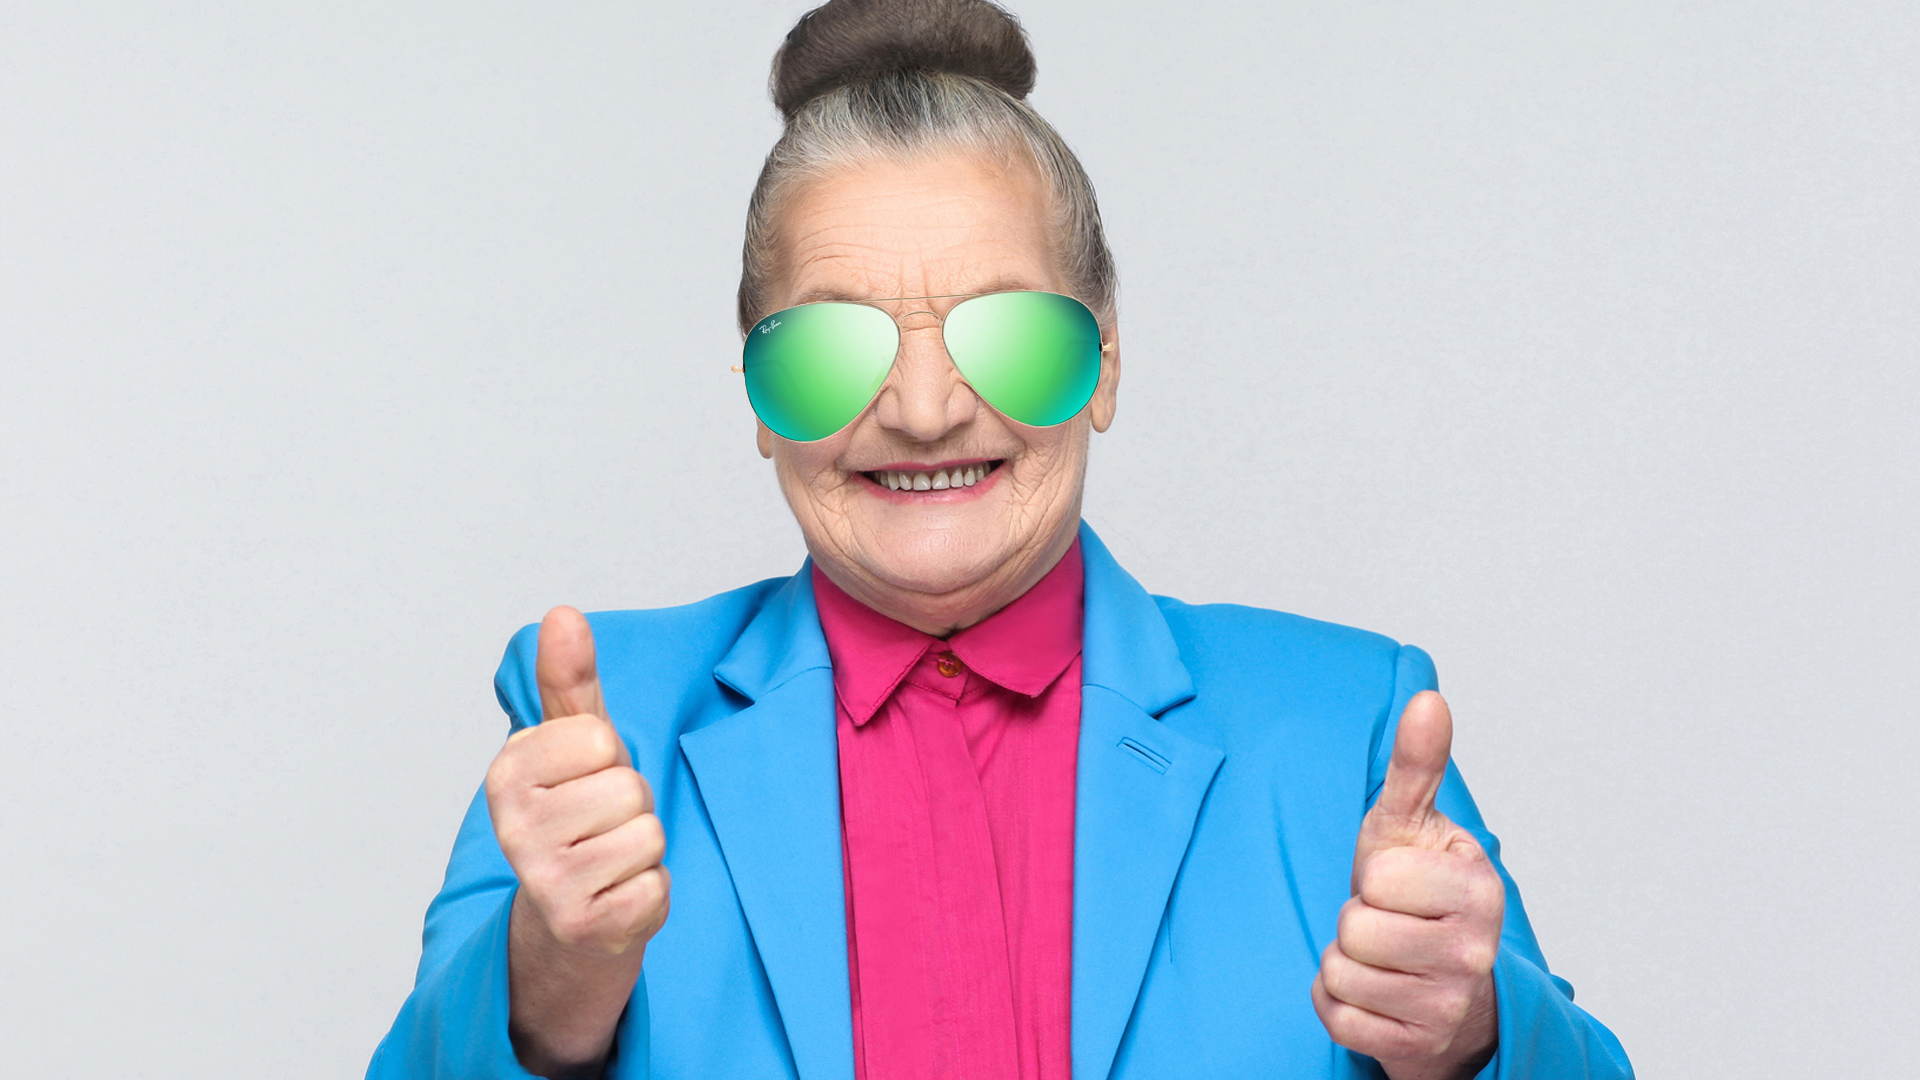 Woman with big oversized sunglasses giving a thumbs up